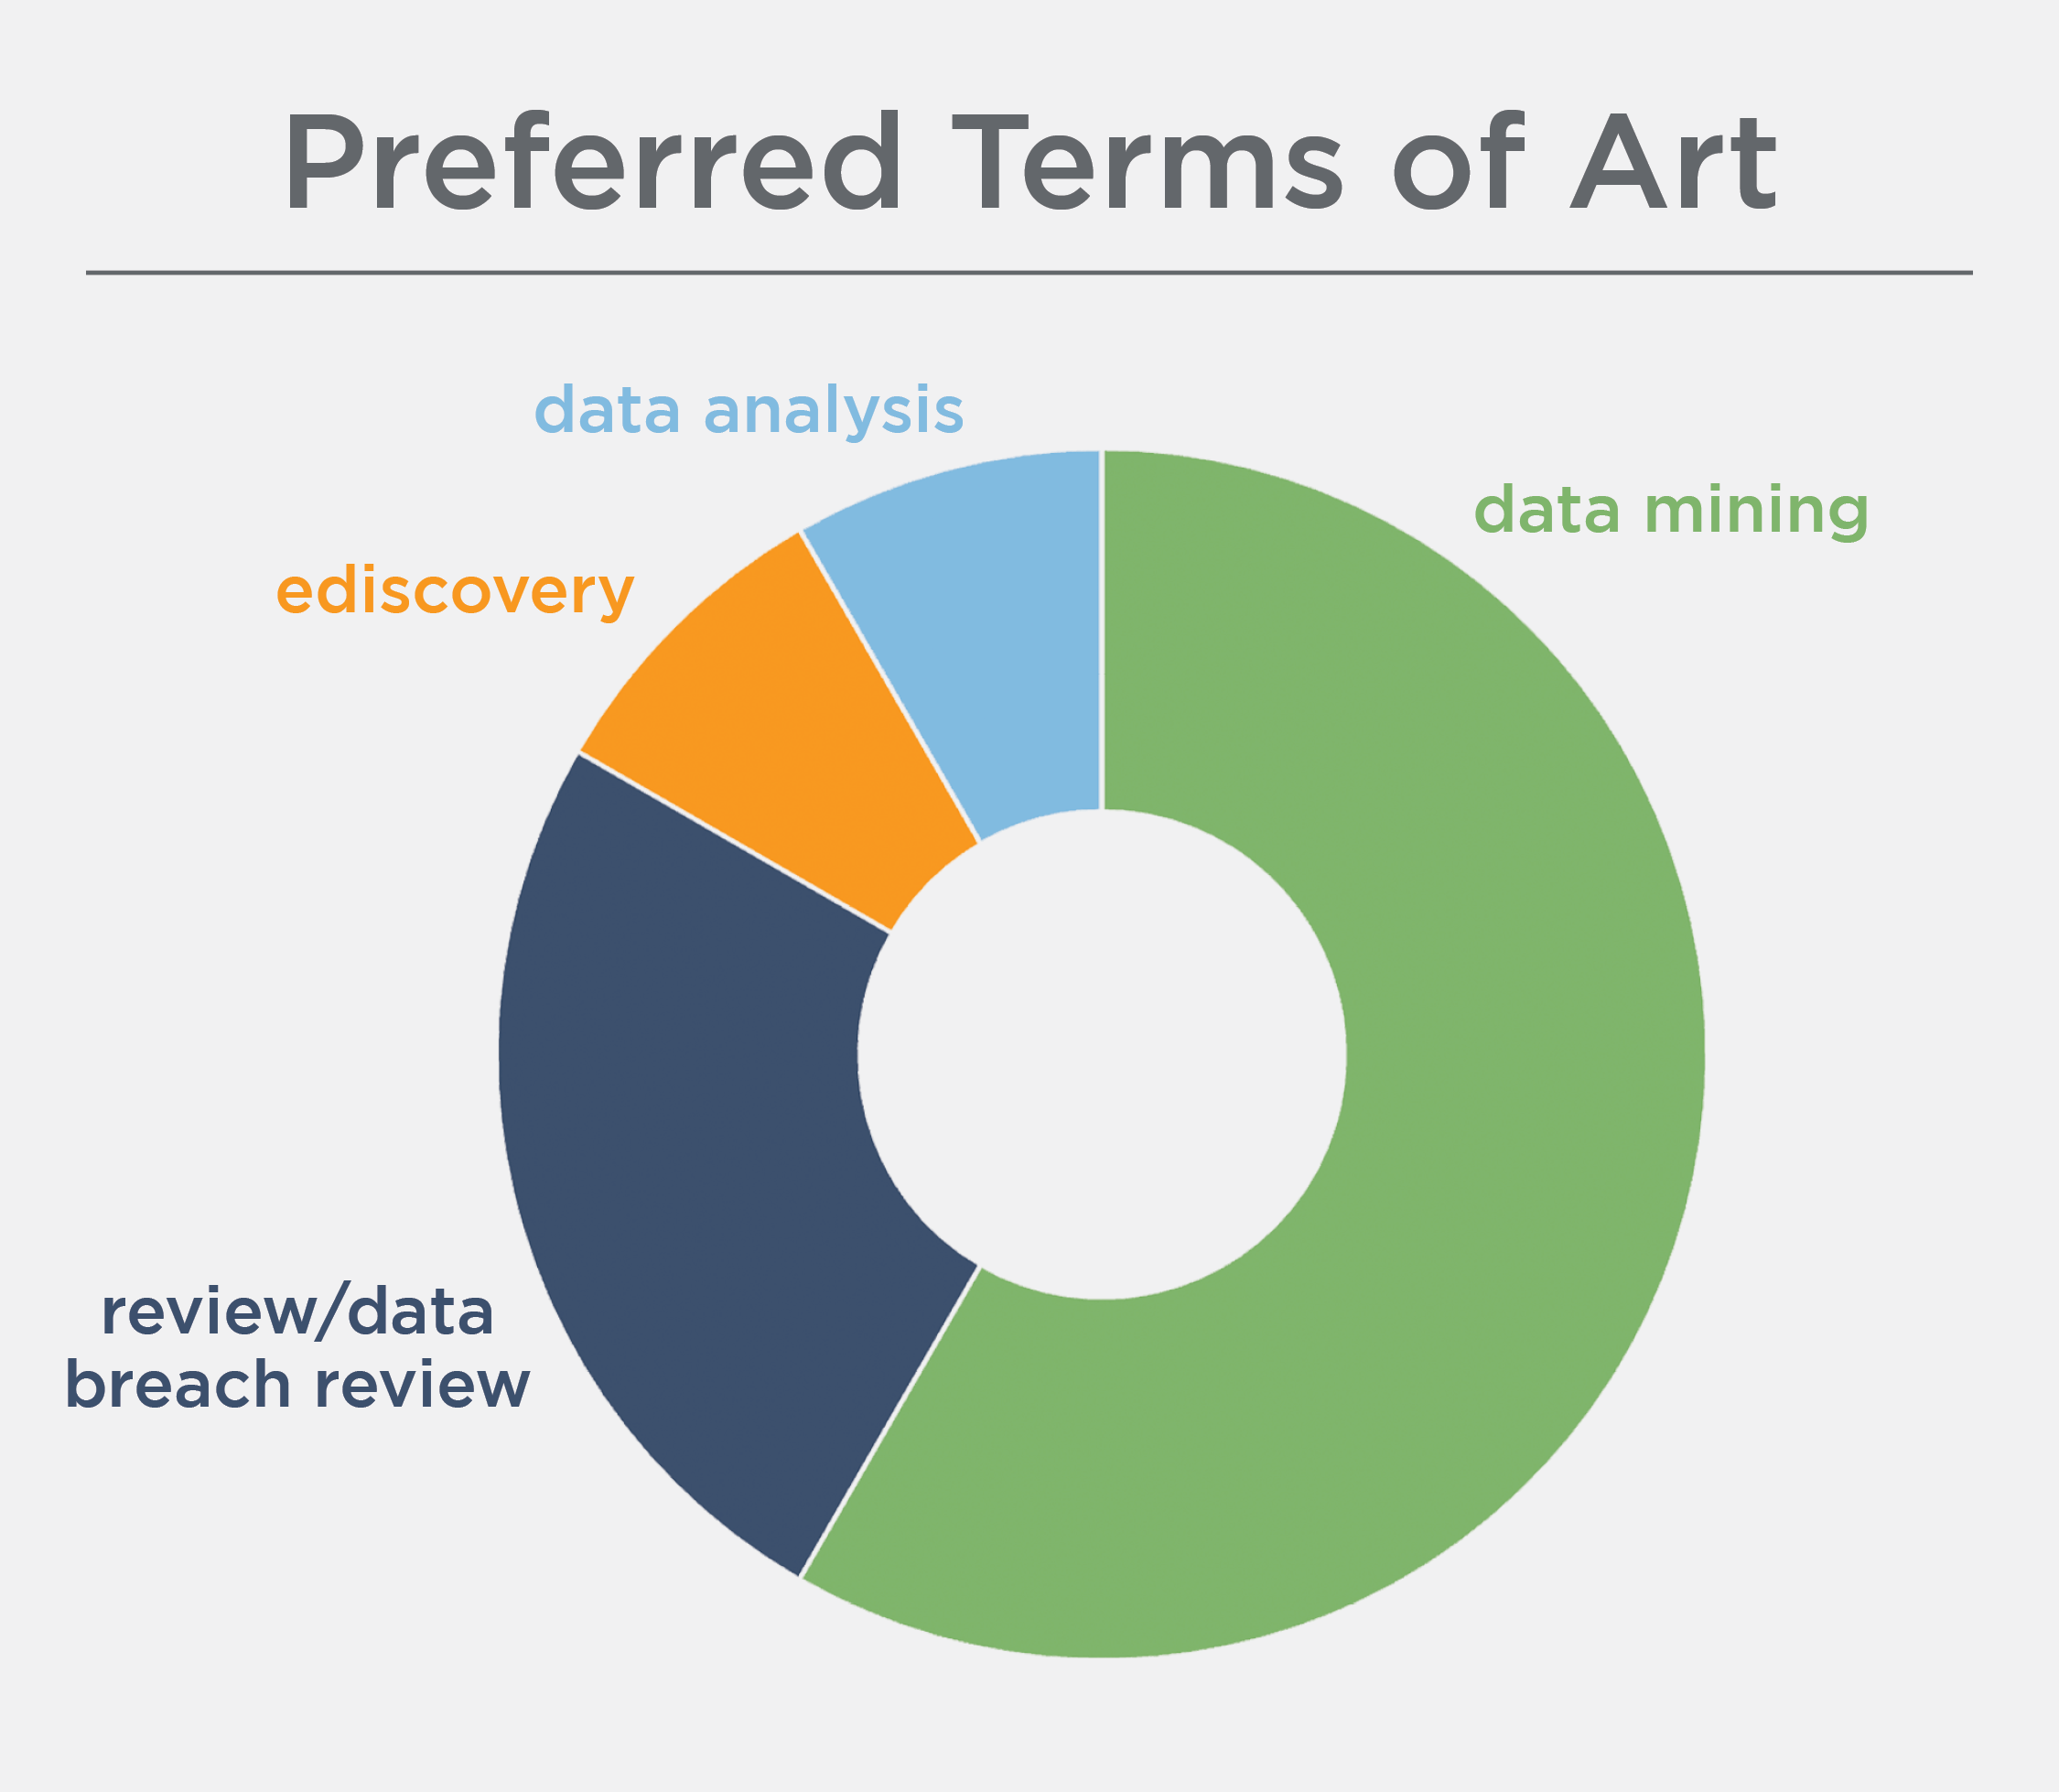 doughnut chart displaying preferred terms of art - largest green piece for data mining, navy for data breach review, and smallest pieces for ediscovery in orange and data analysis in light blue